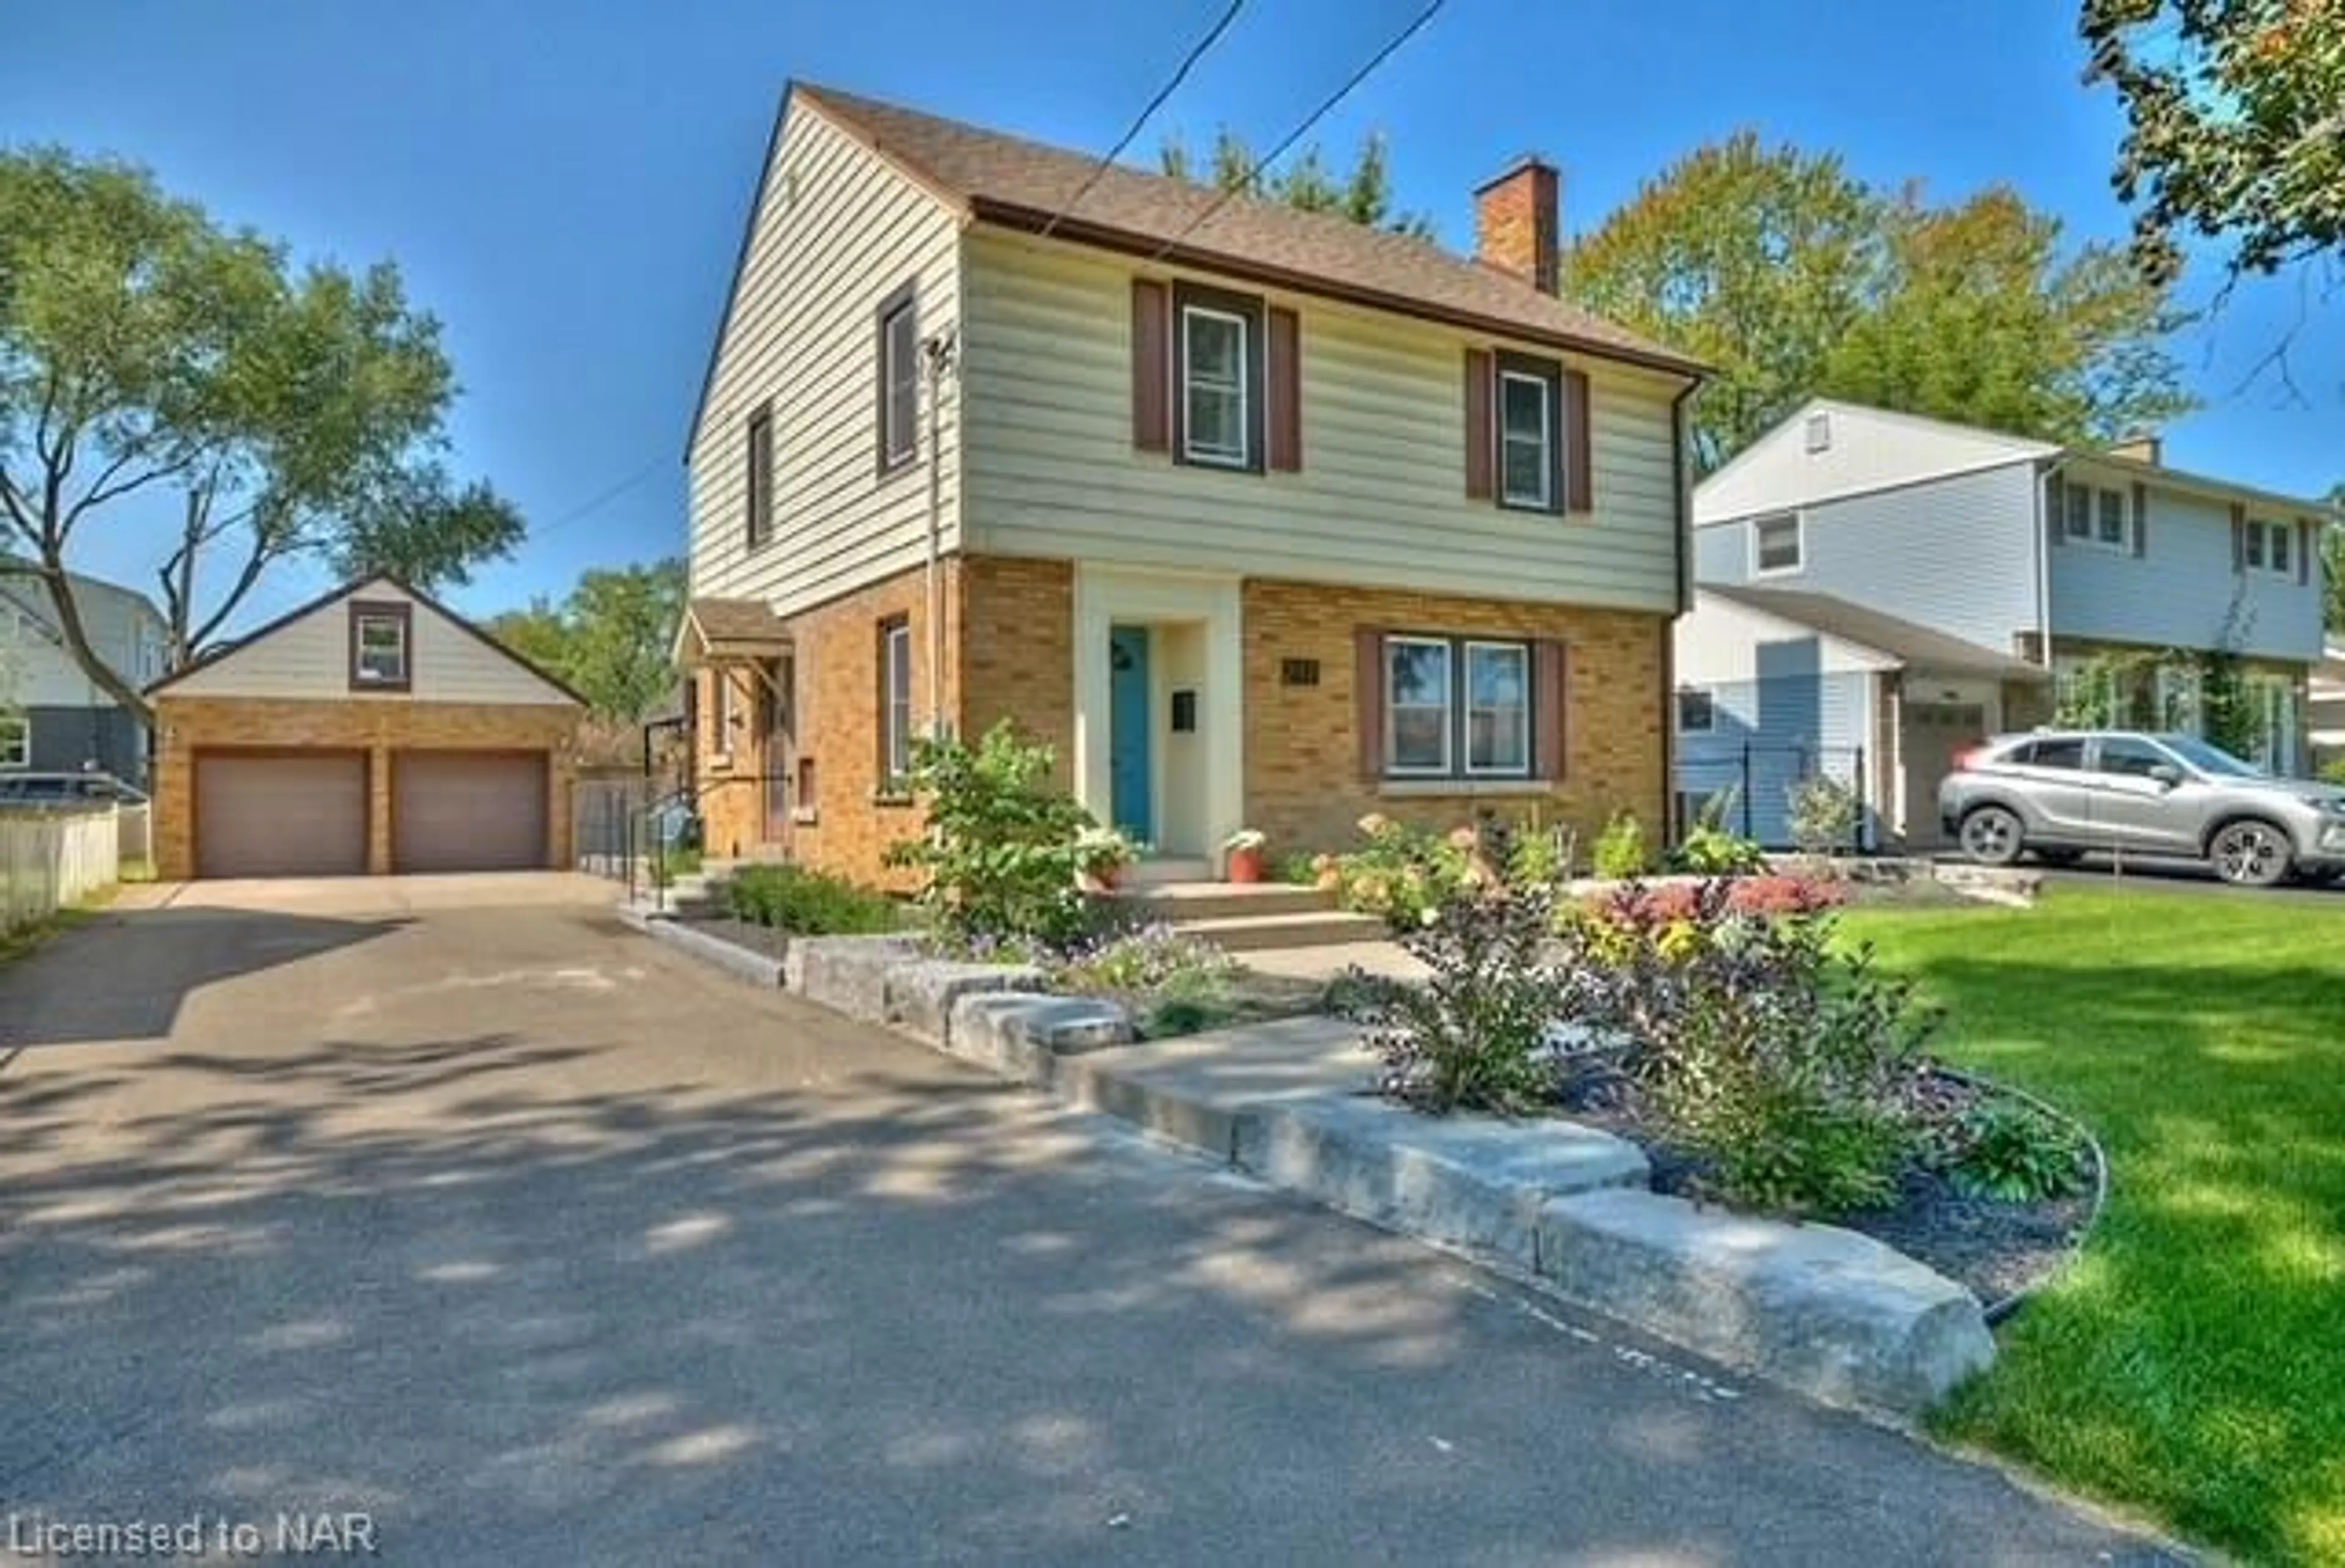 Frontside or backside of a home for 217 Edgar St, Welland Ontario L3C 1T6